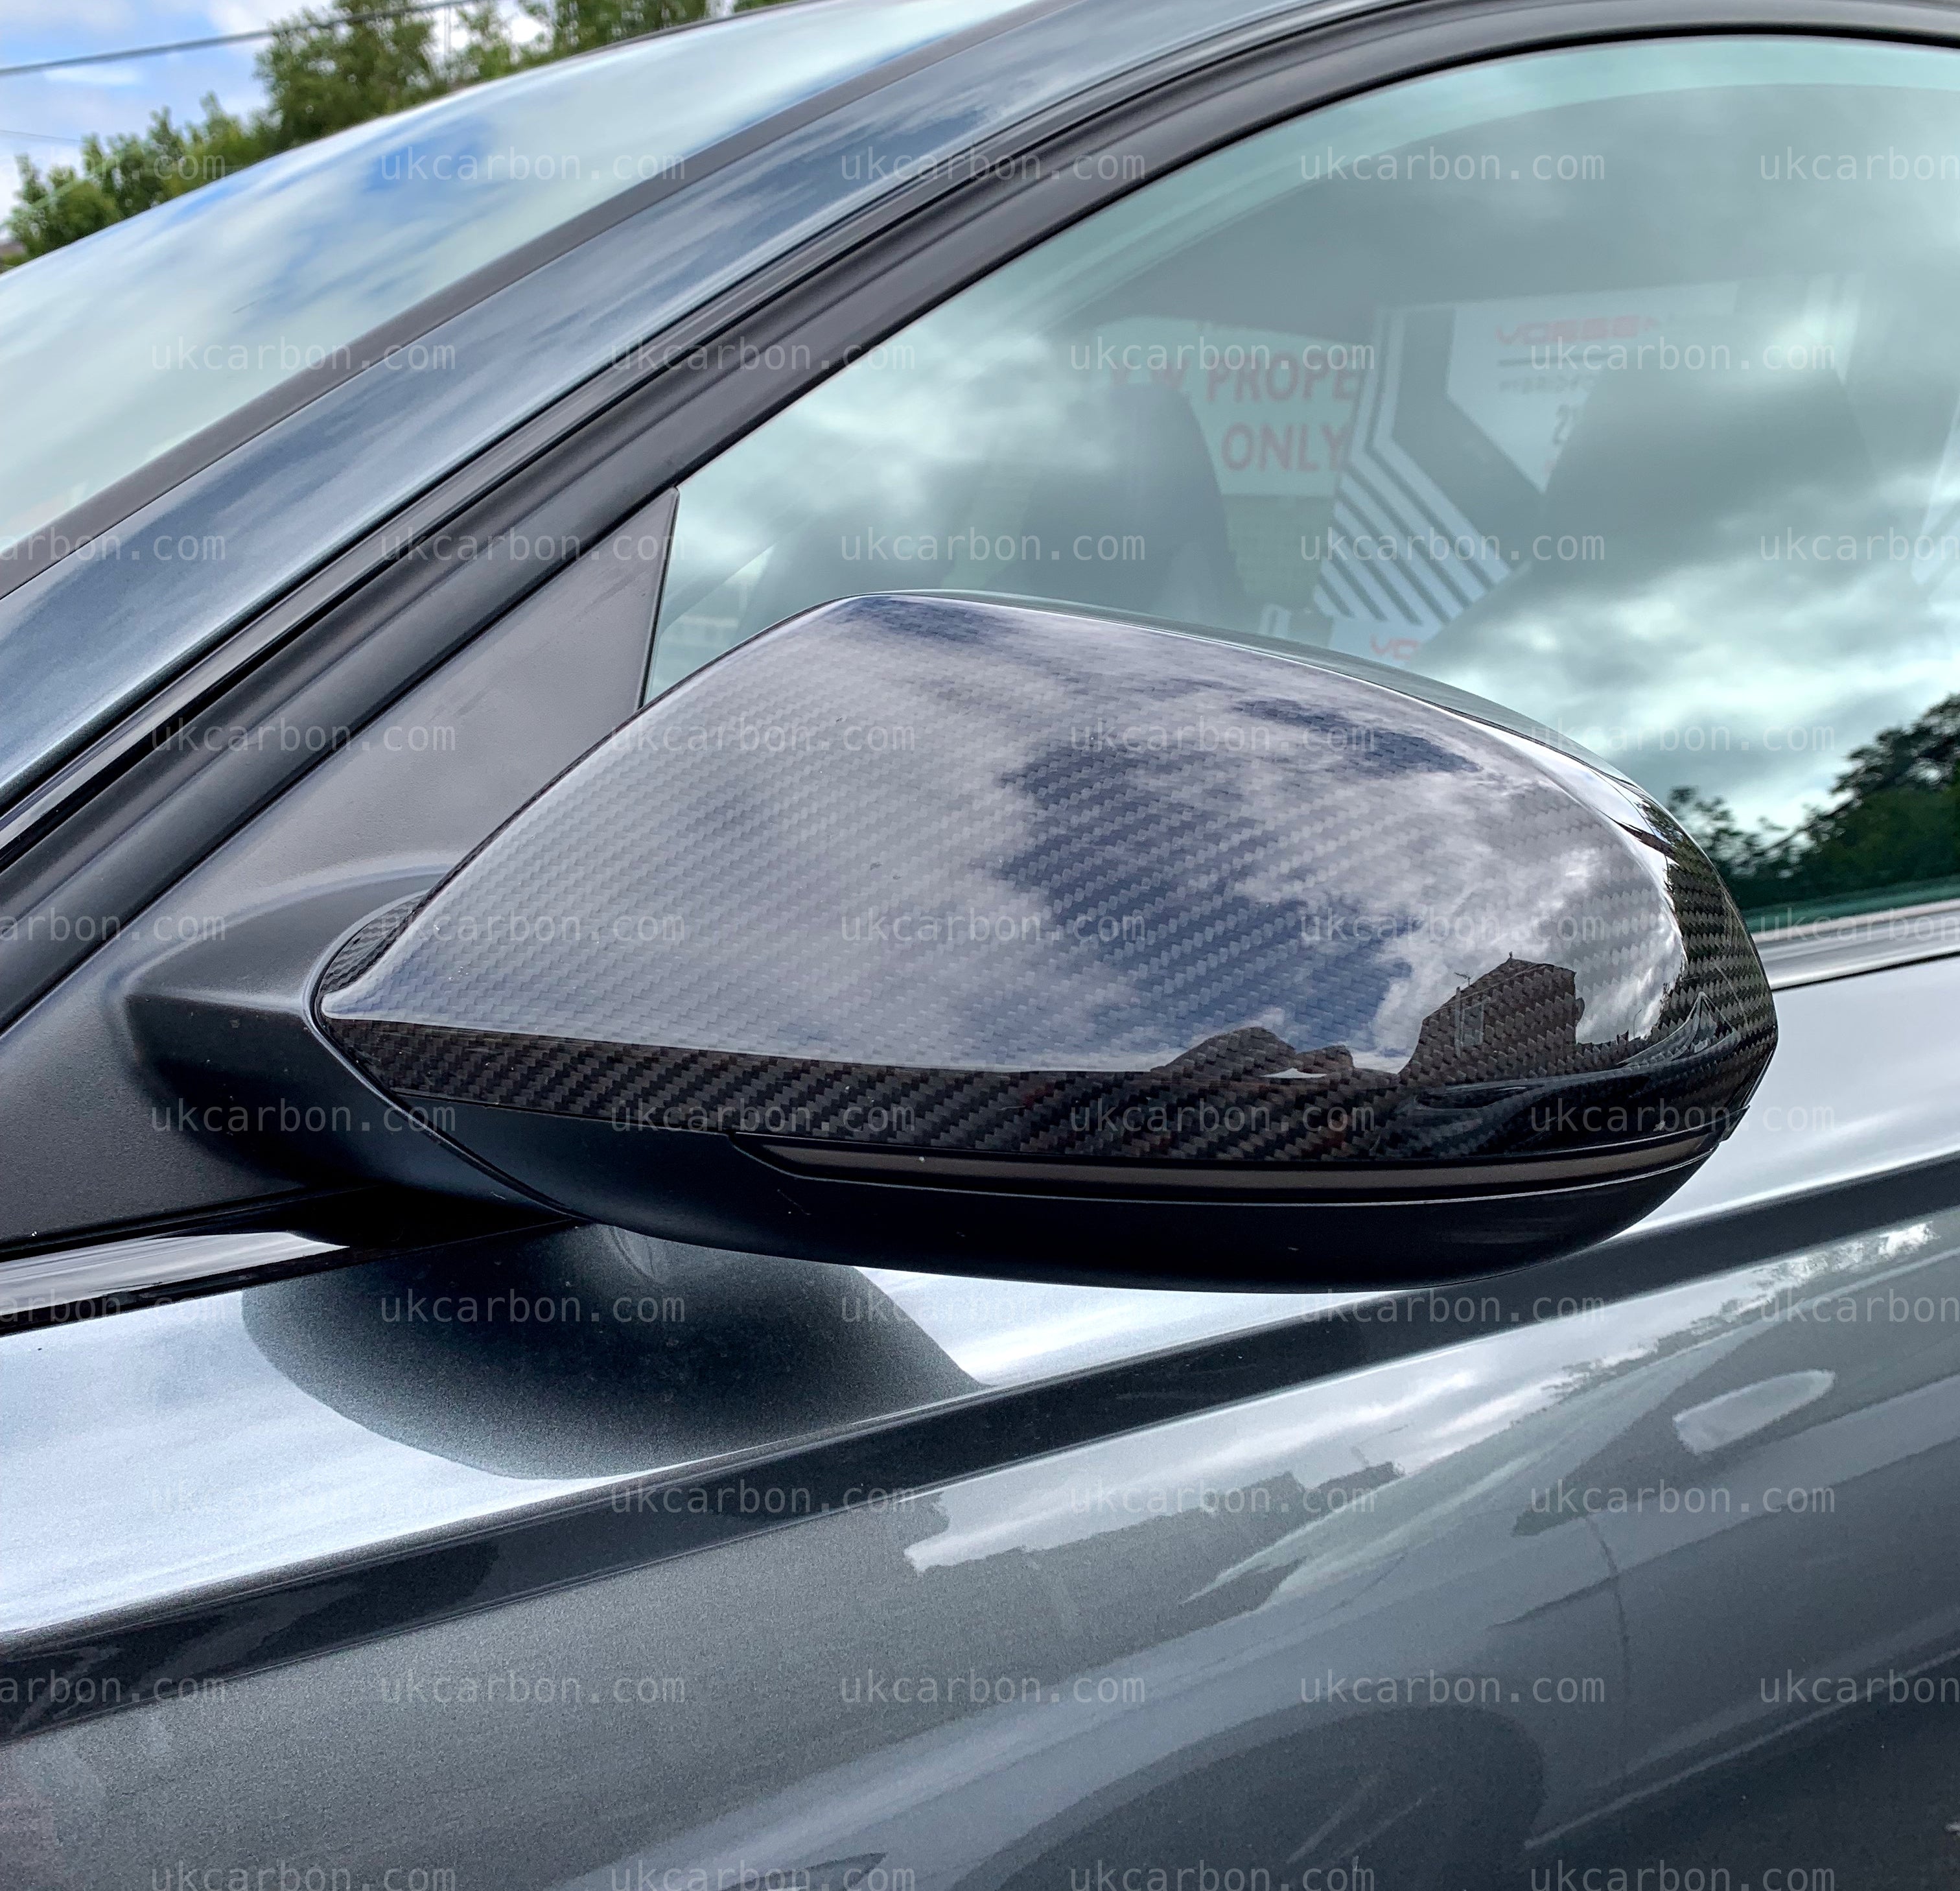 Audi A6 S6 RS6 Carbon Fibre Mirror Cover Replacement by UKCarbon